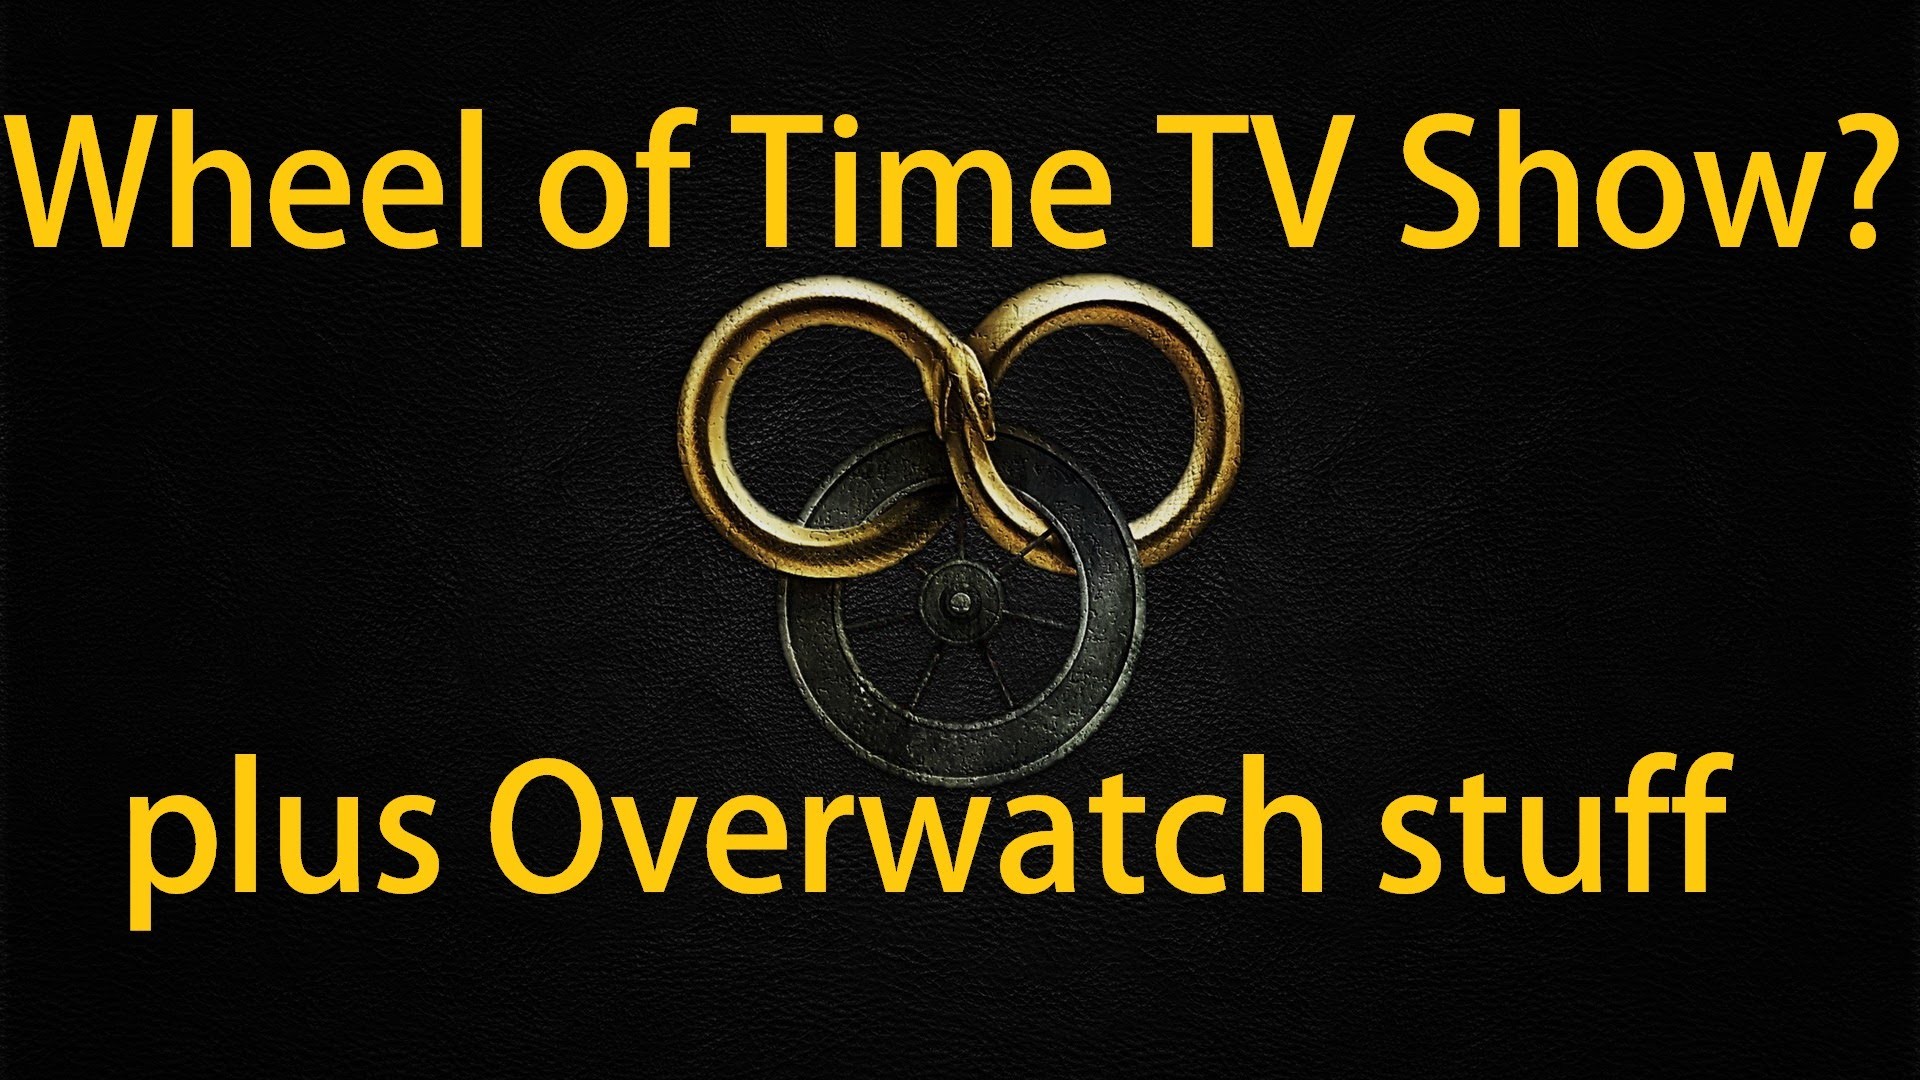 1920x1080 Overwatch Beta and Wheel of Time News!